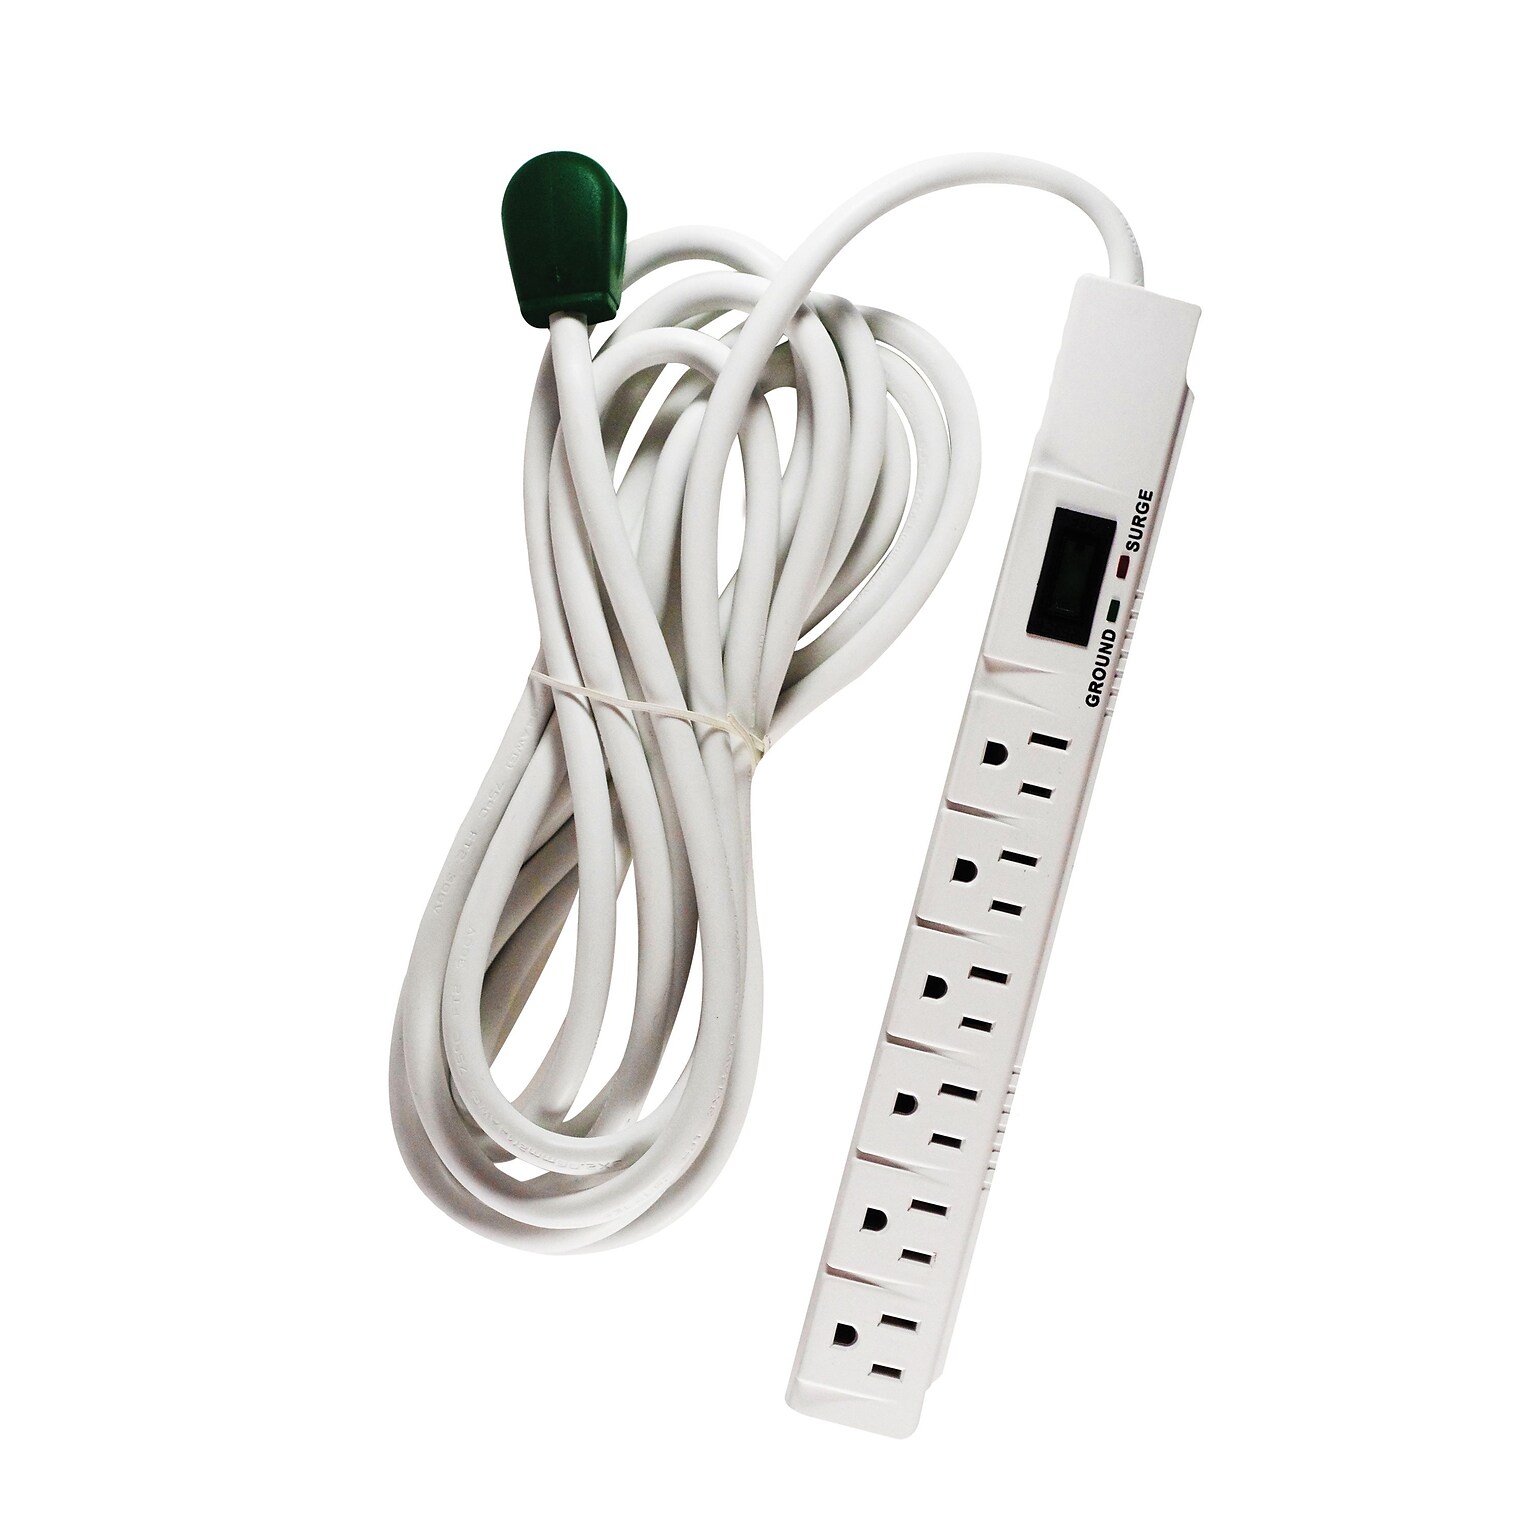 GoGreen Power 15 Surge Protector, 6 Outlets, White (GG-16315-15)